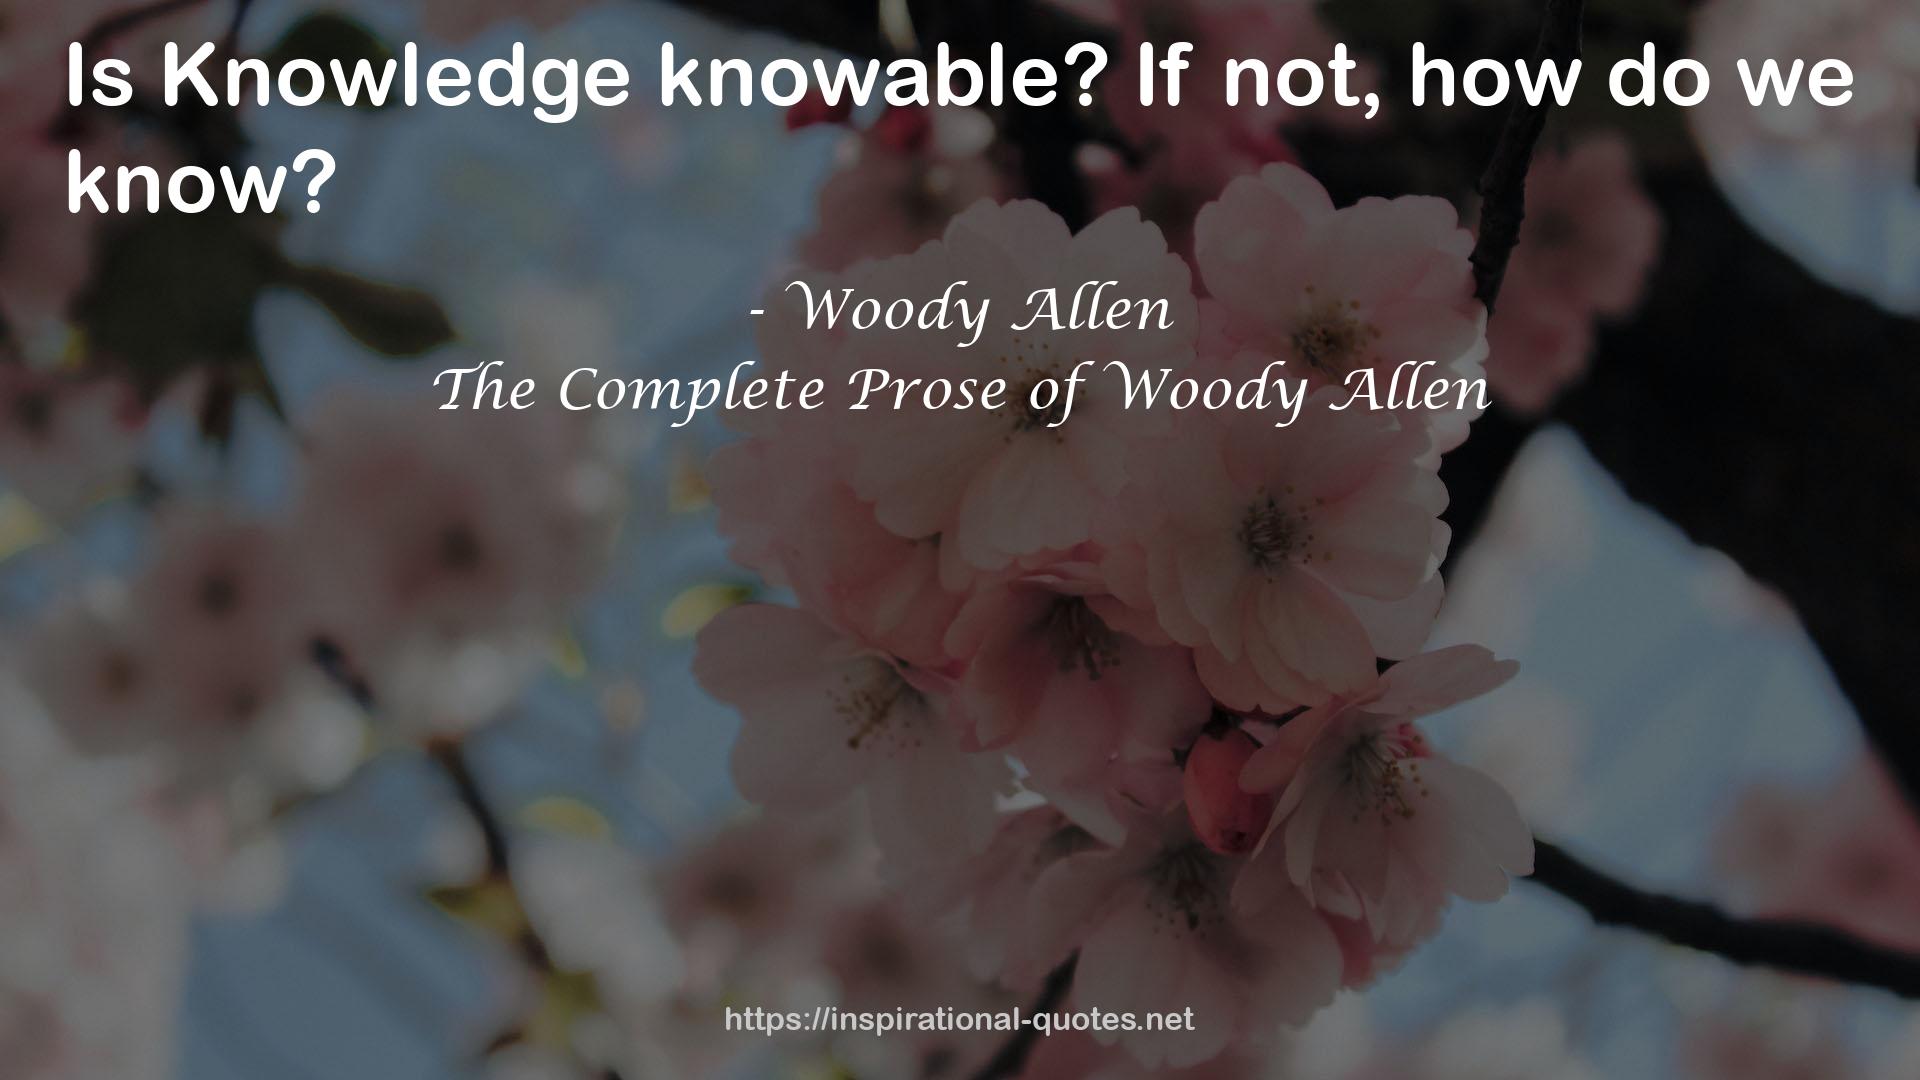 The Complete Prose of Woody Allen QUOTES